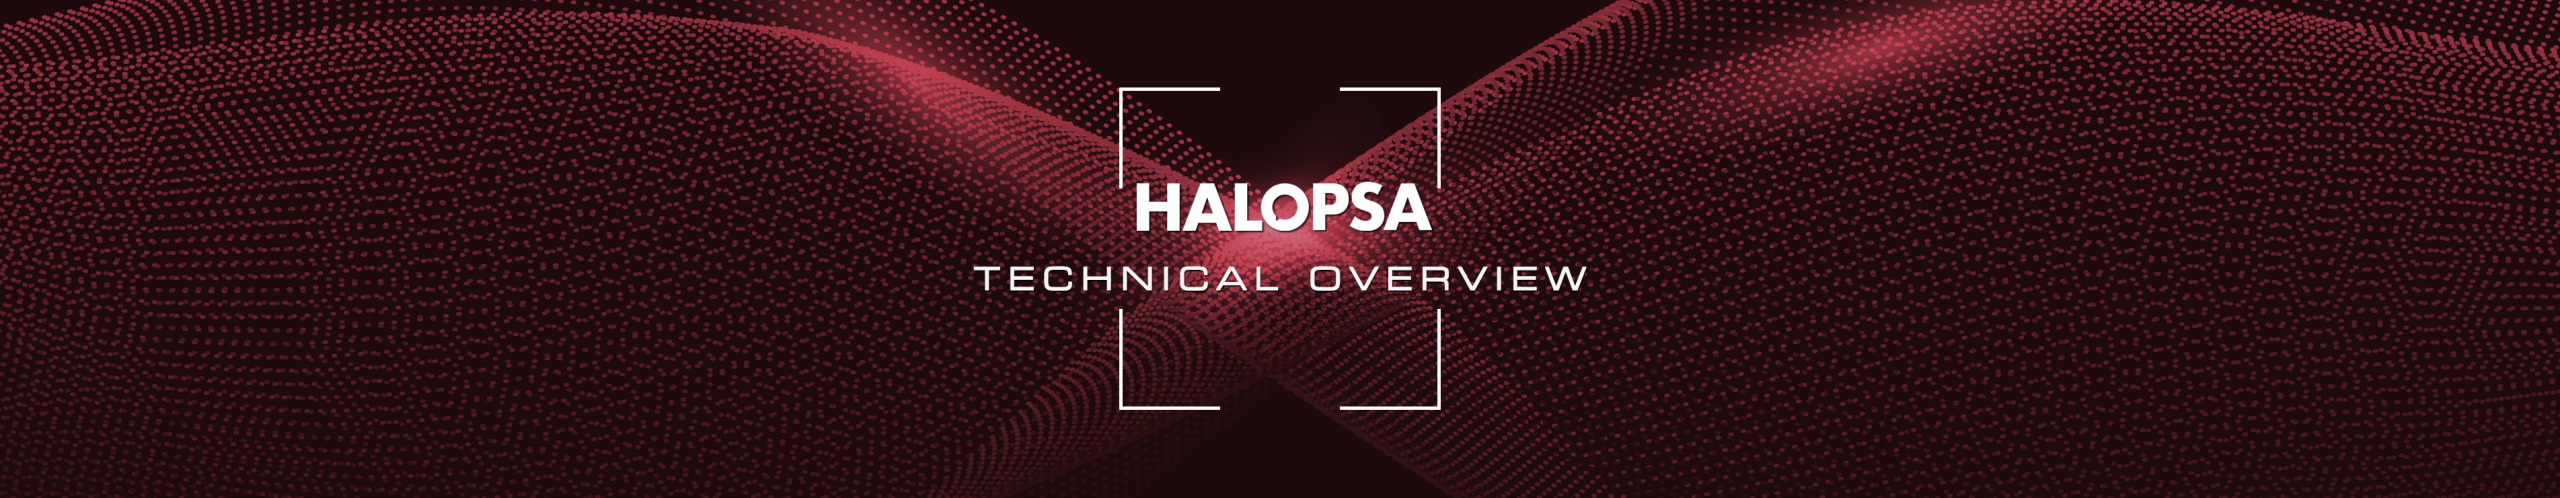 HaloPSA Technical Overview